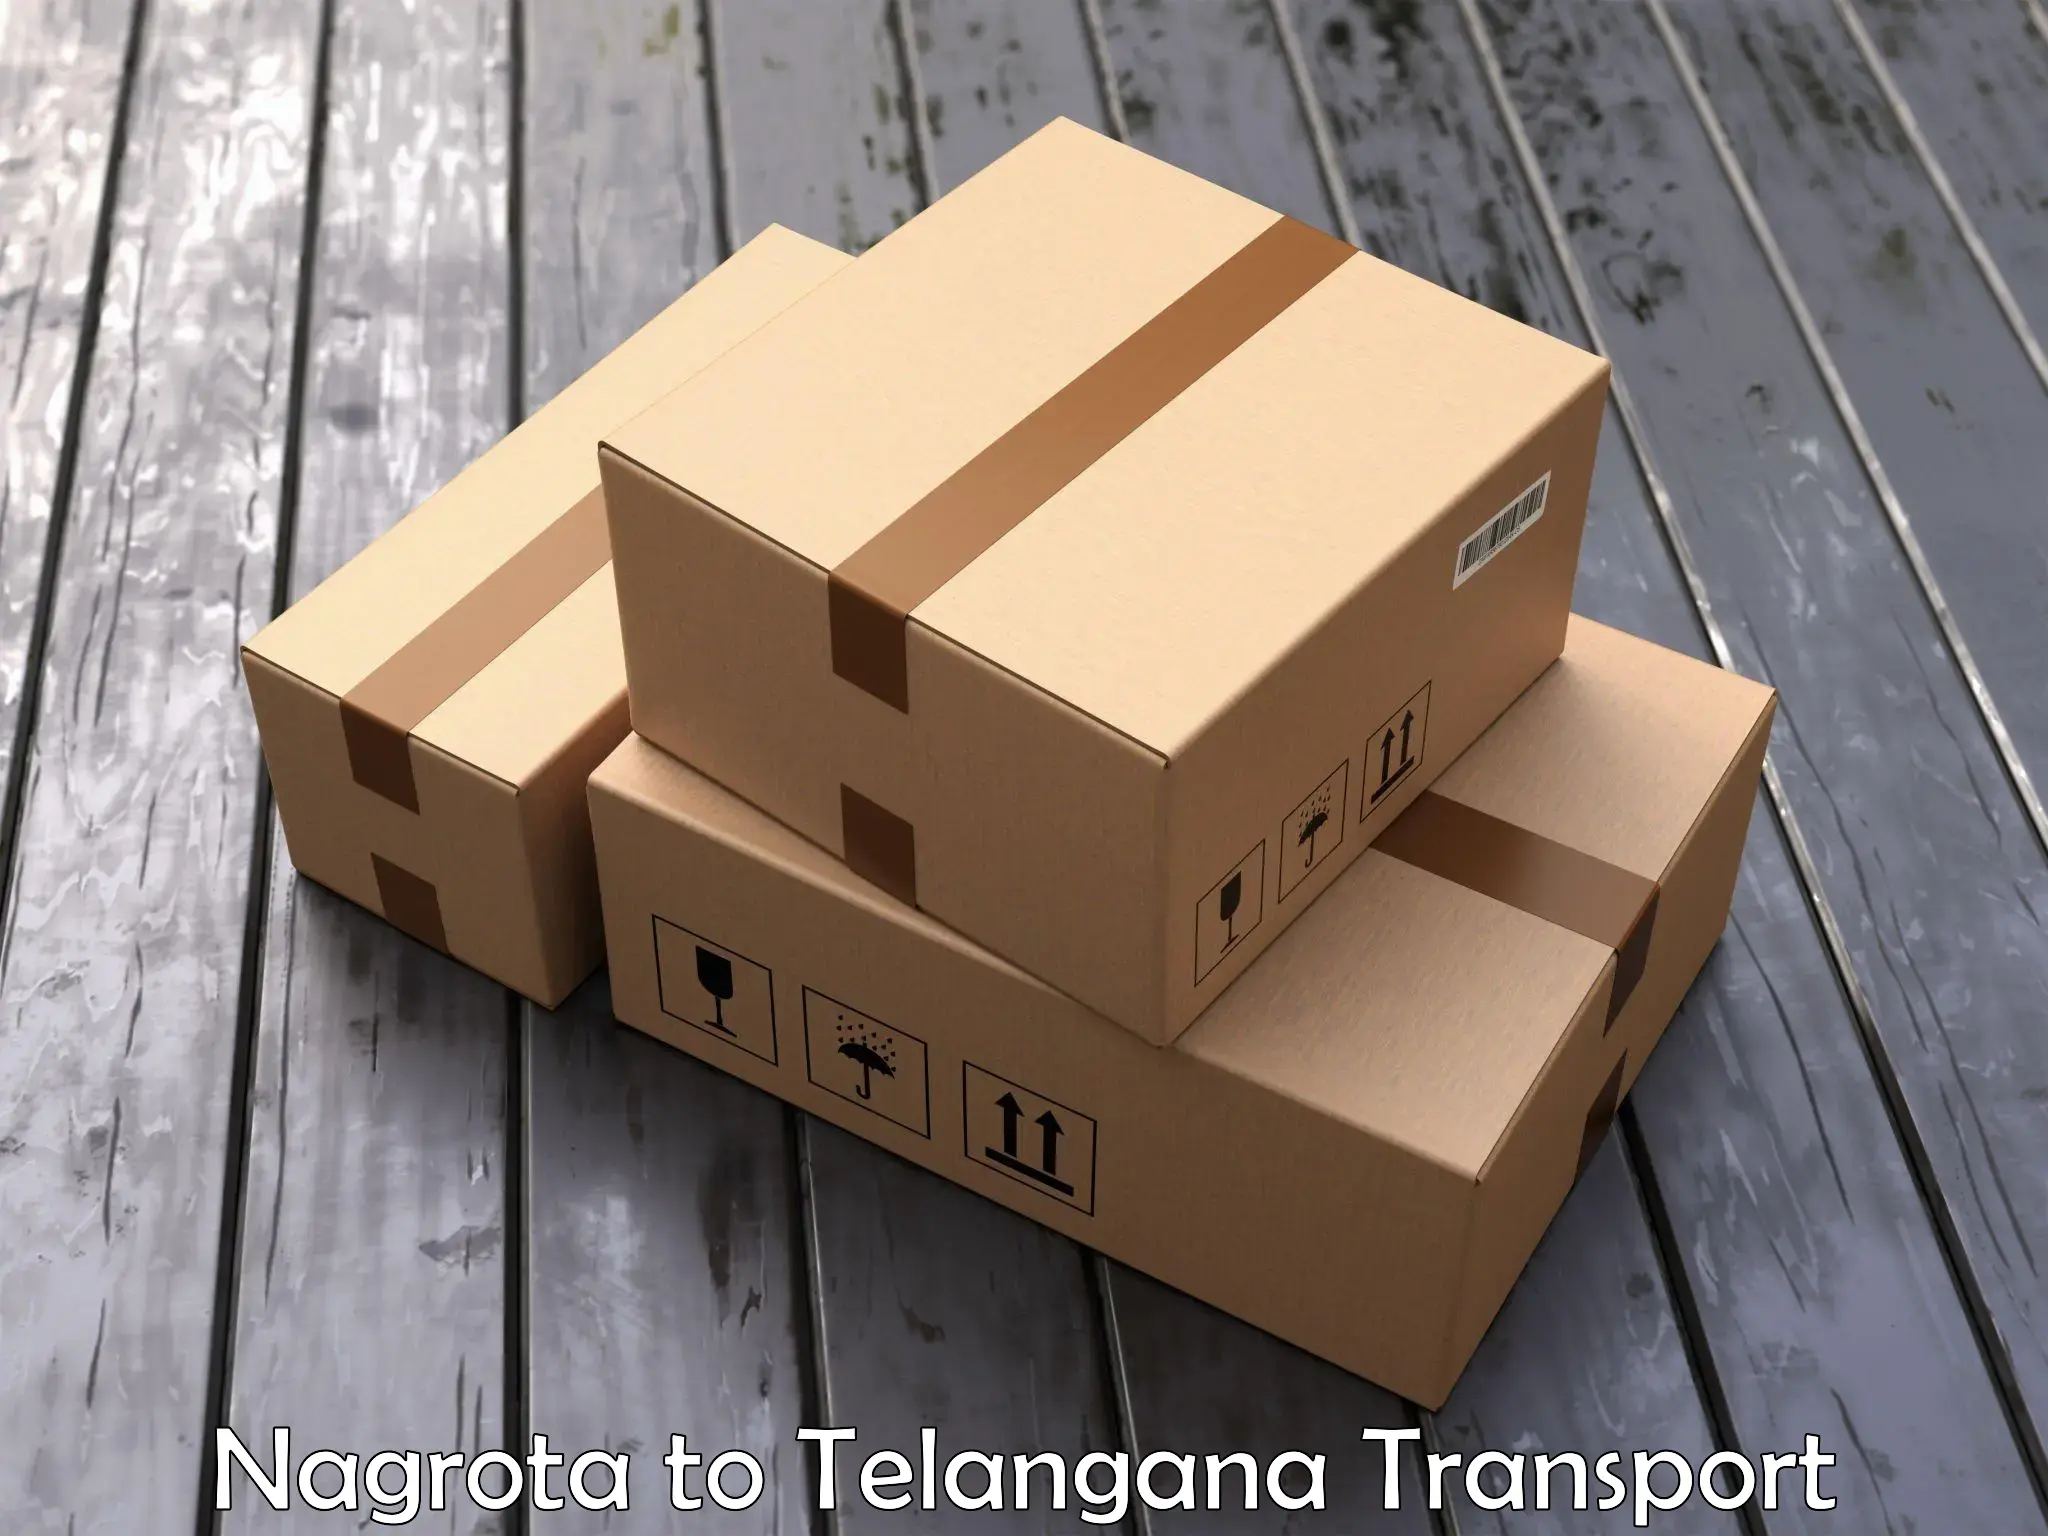 Truck transport companies in India Nagrota to Chennur